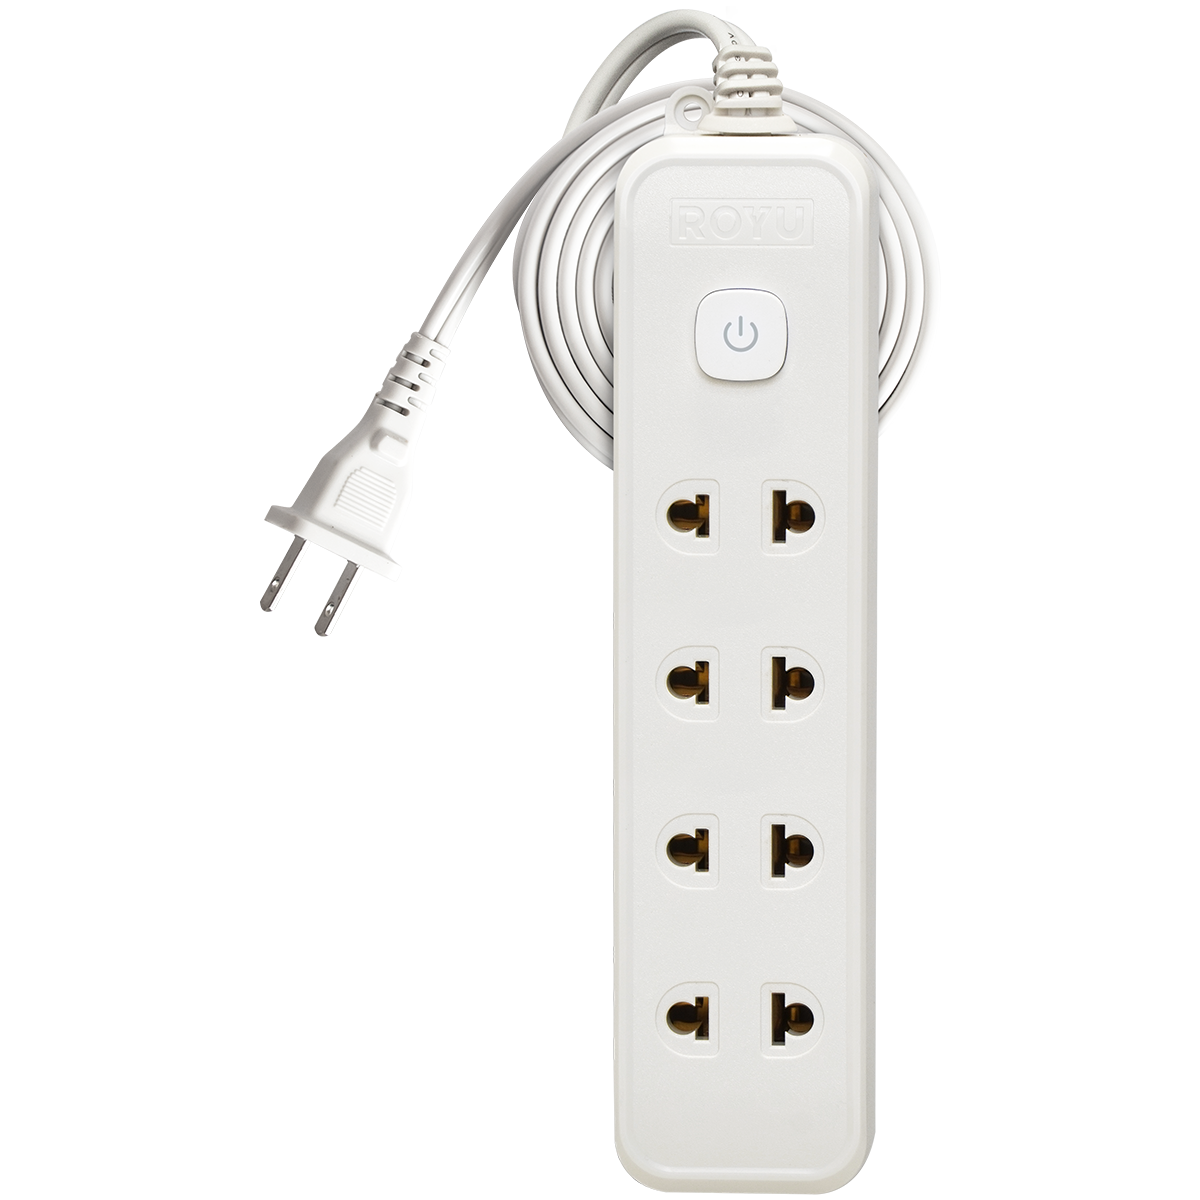 ROYU 4+1 GANG Extension Cord with Push Button Switch (6M Extension)